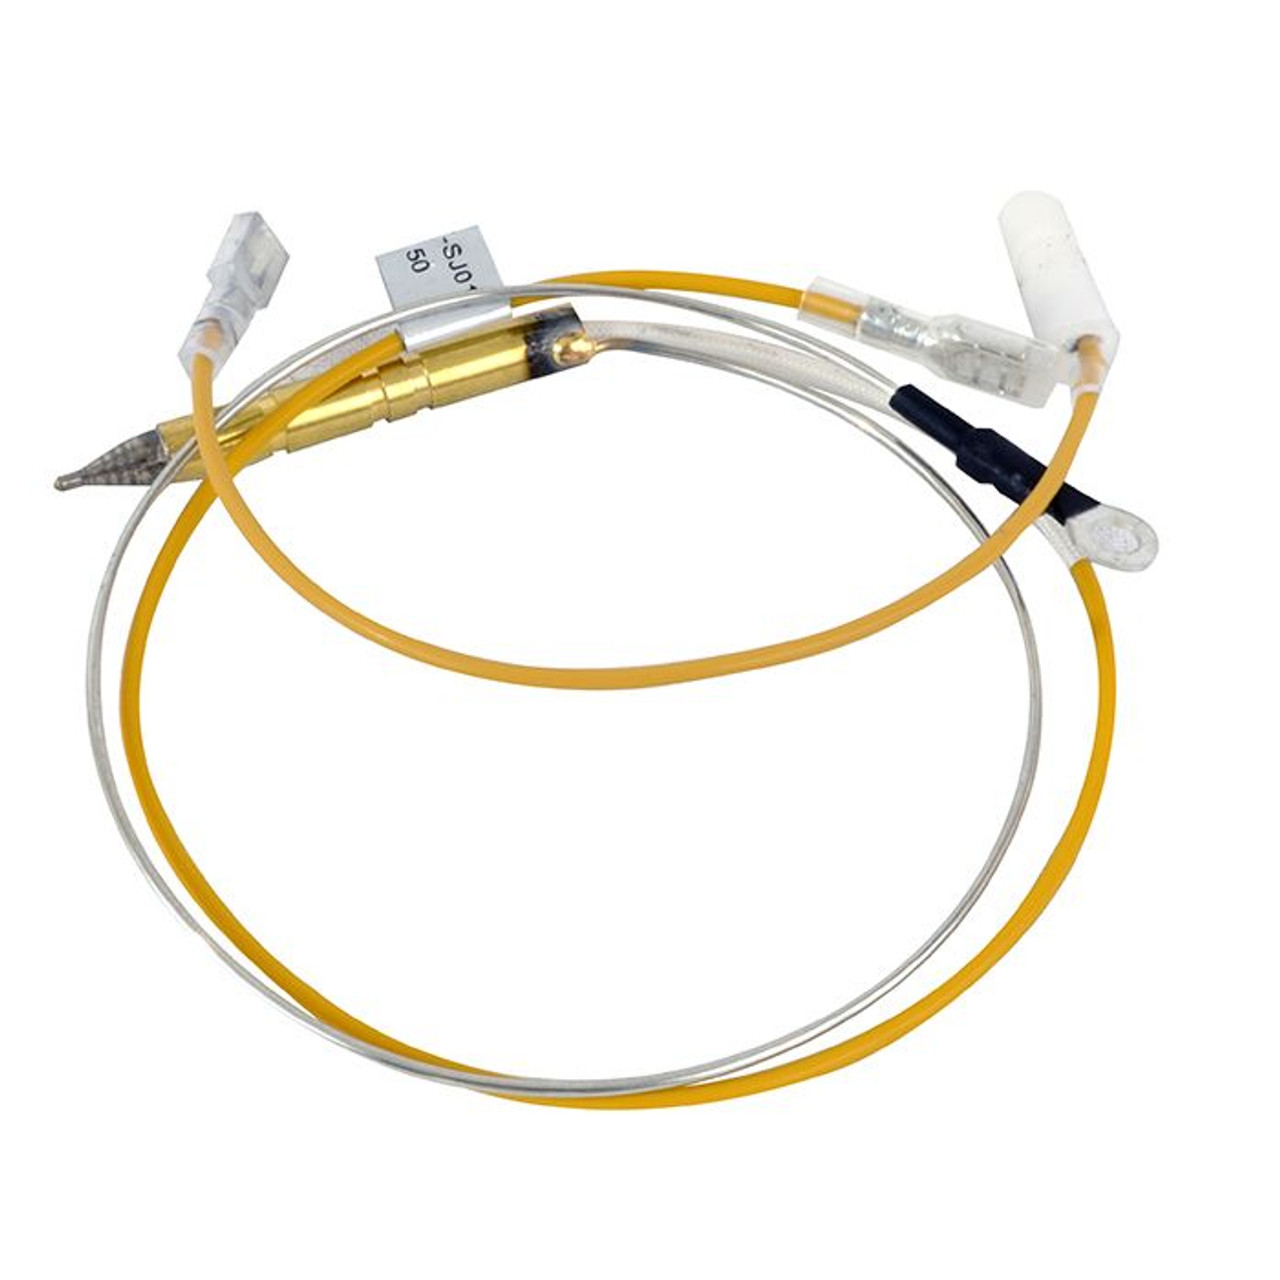 Mr Heater Tank Top Thermocouple Assembly with Tip-Over Switch